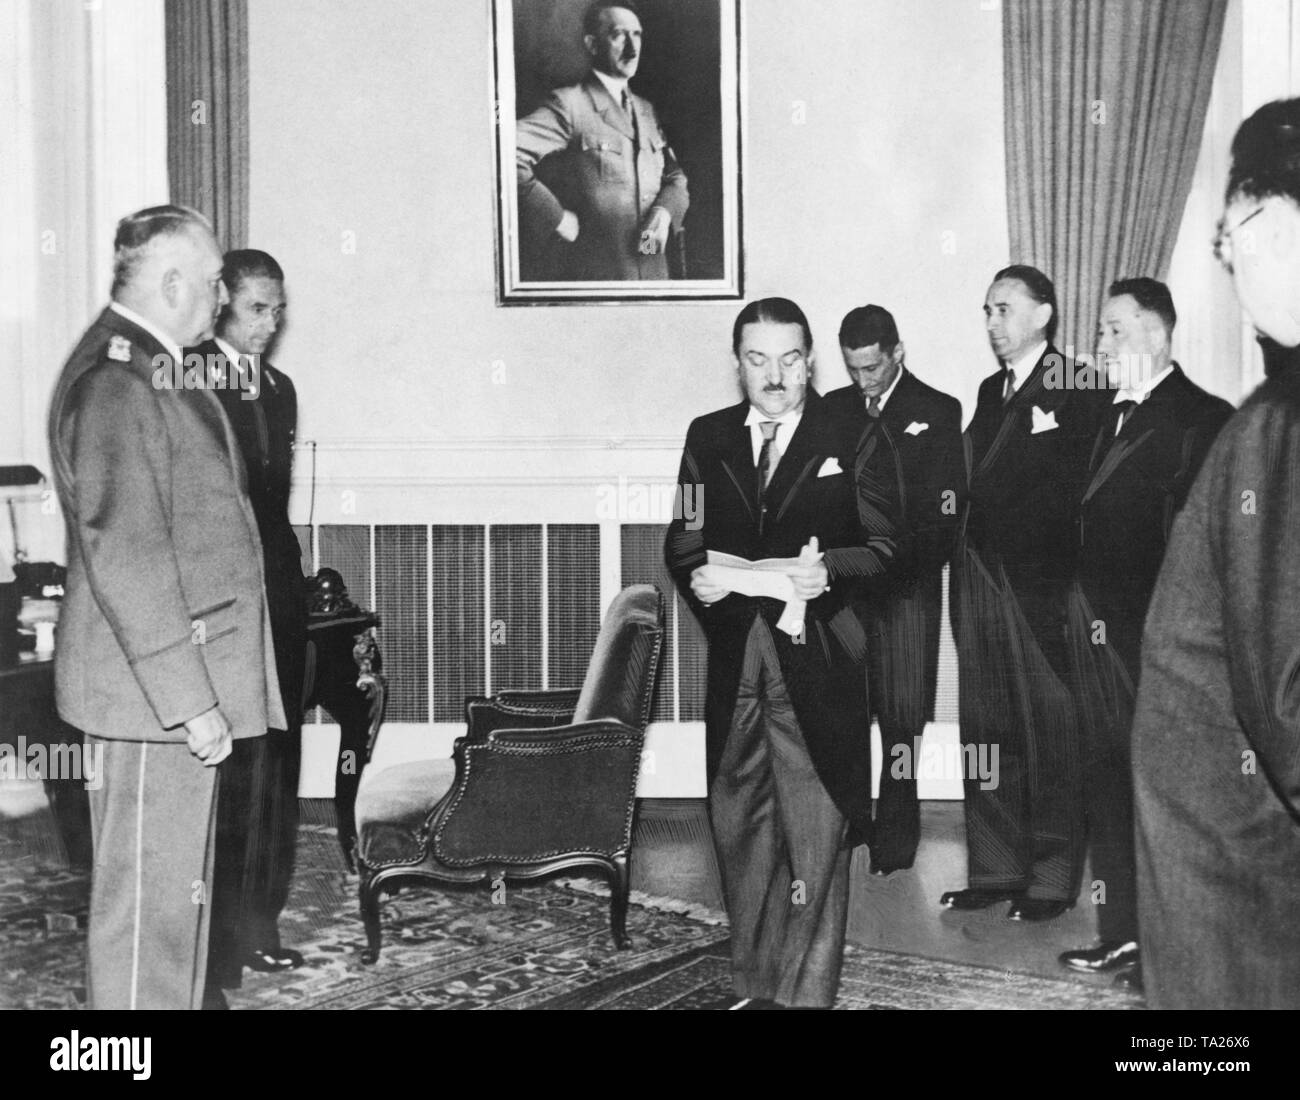 The government of the Protectorate of Bohemia and Moravia after the occupation of Czechoslovakia by the National Socialists. From left to right: Reichsprotektor Konstantin von Neurath, Prime Minister Alois Elias (center), Minister of Transport Jiri Havelka, Agriculture Minister Ladislav Karel Feierabend, Minister of Finance Josef Kalfus and Minister Dr. Ing. Sadek. In the background, a portrait of Adolf Hitler. Stock Photo